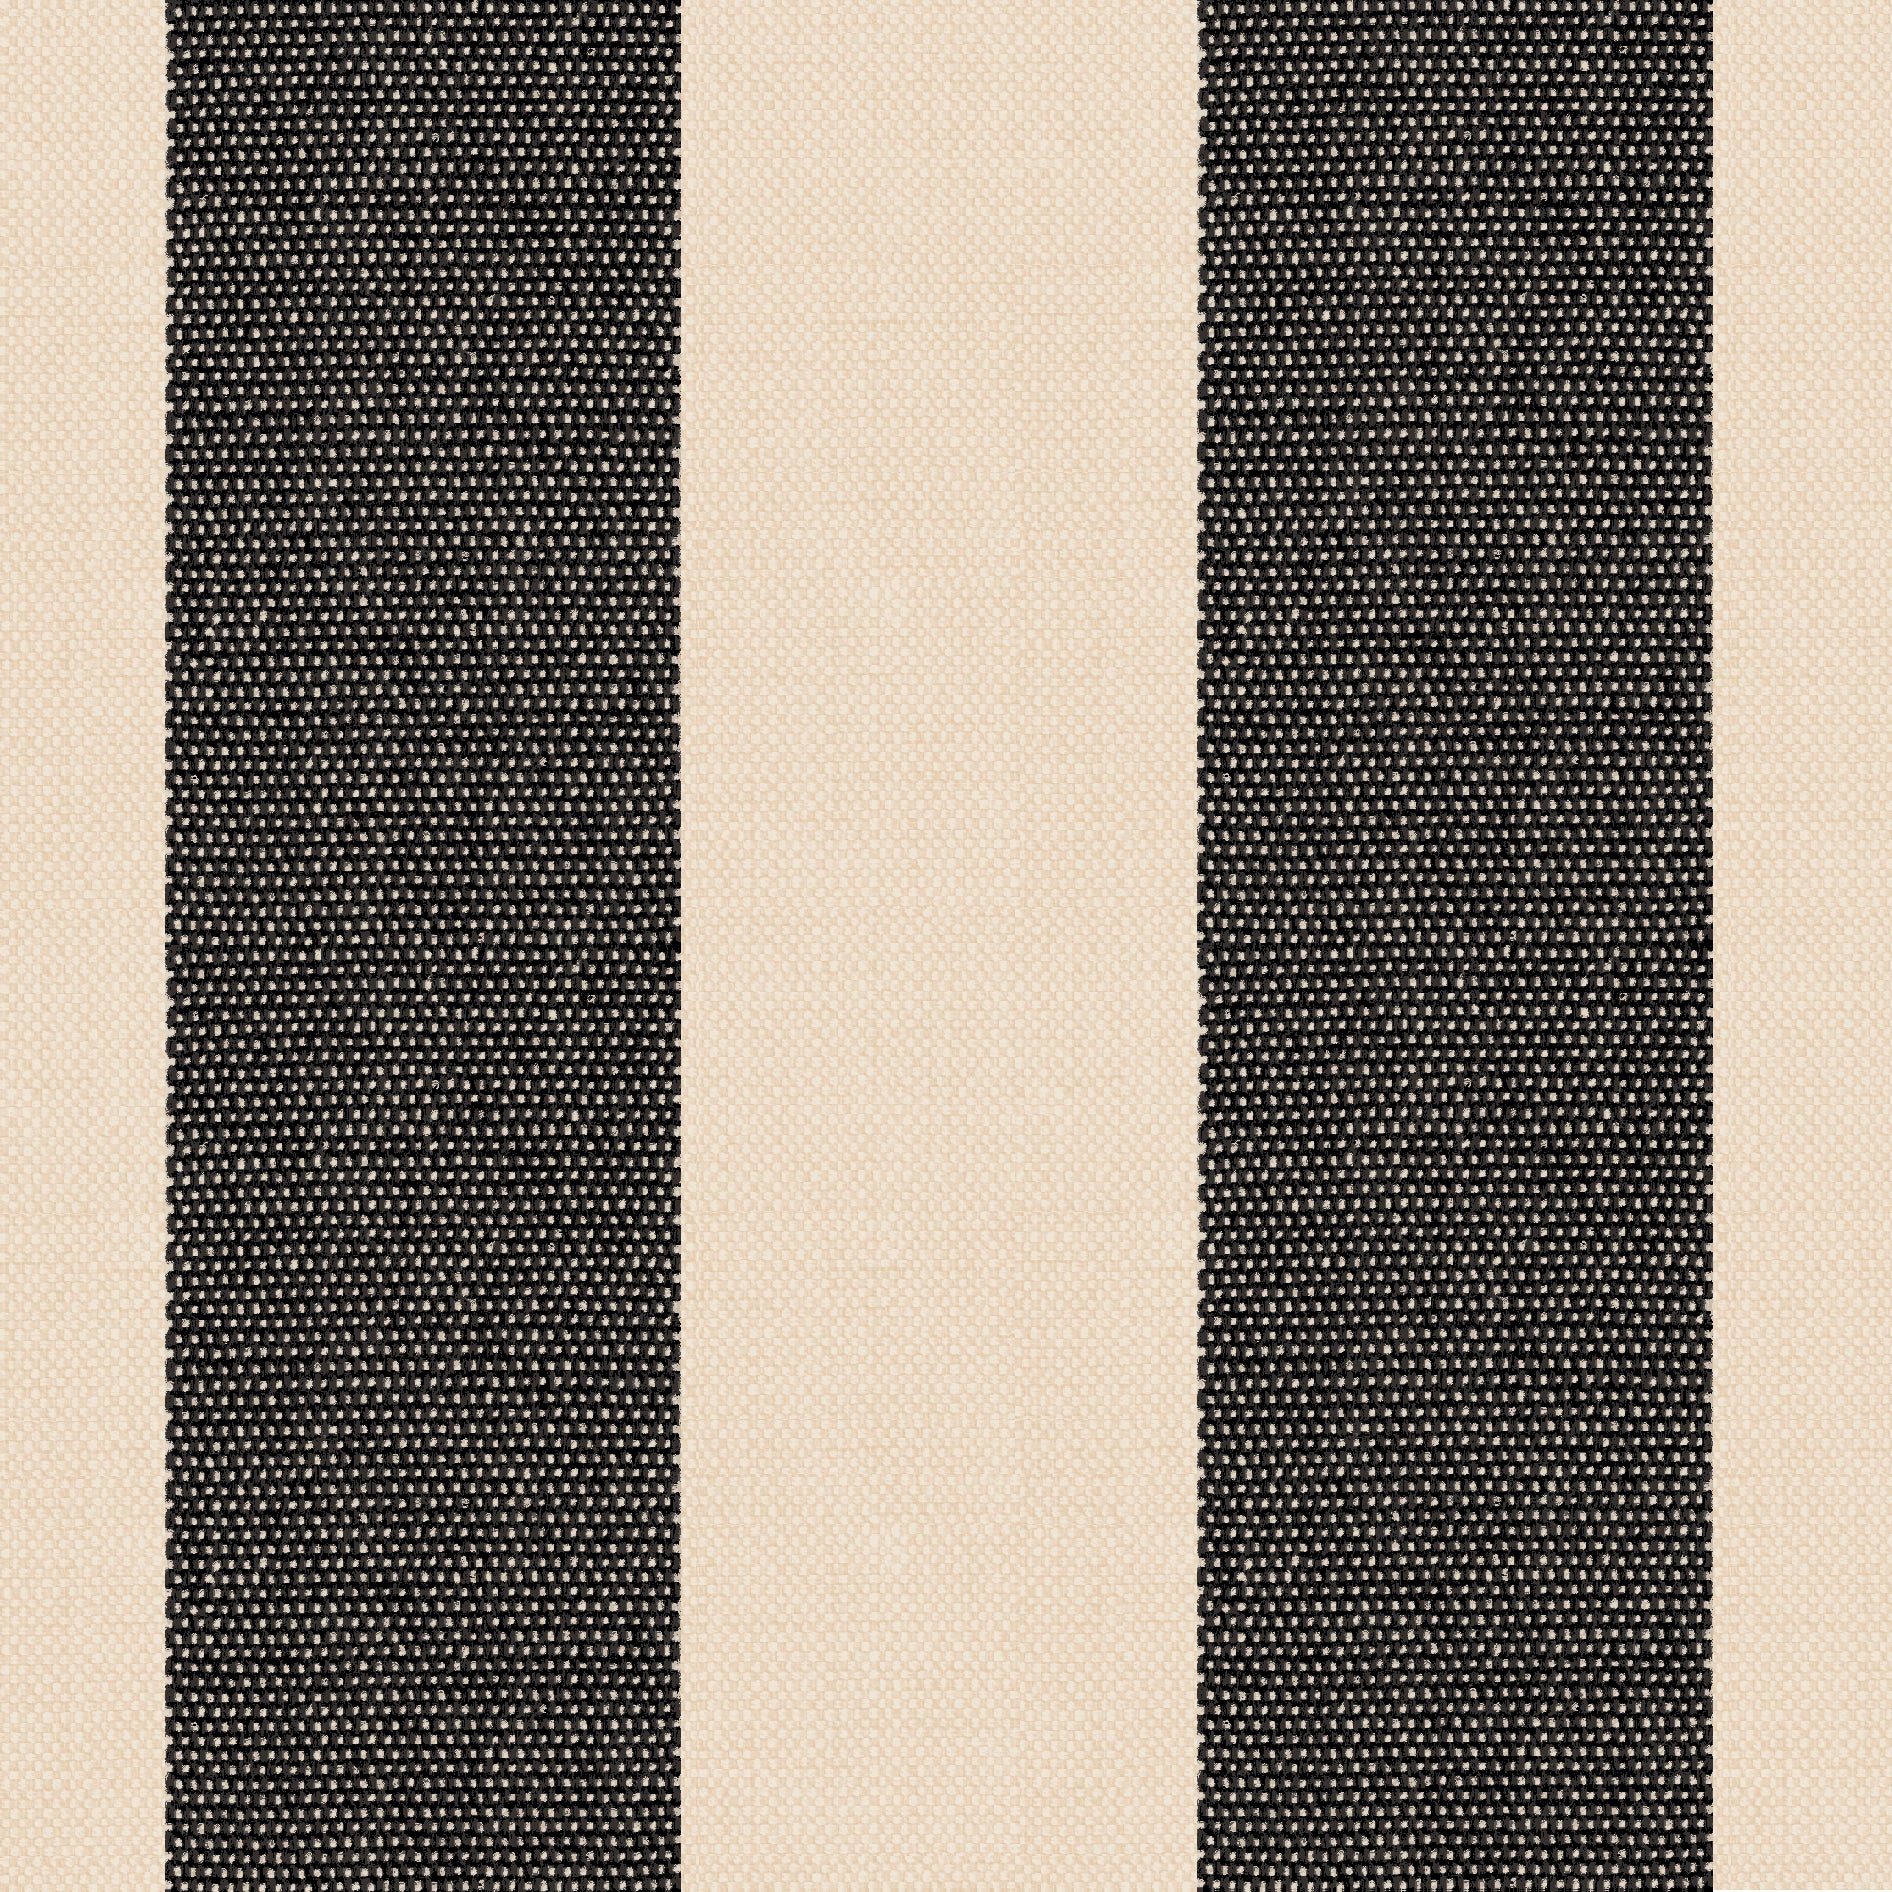 Beatrice Daylight Stripe Made to Measure Roller Blind Fabric Sample Beatrice Black